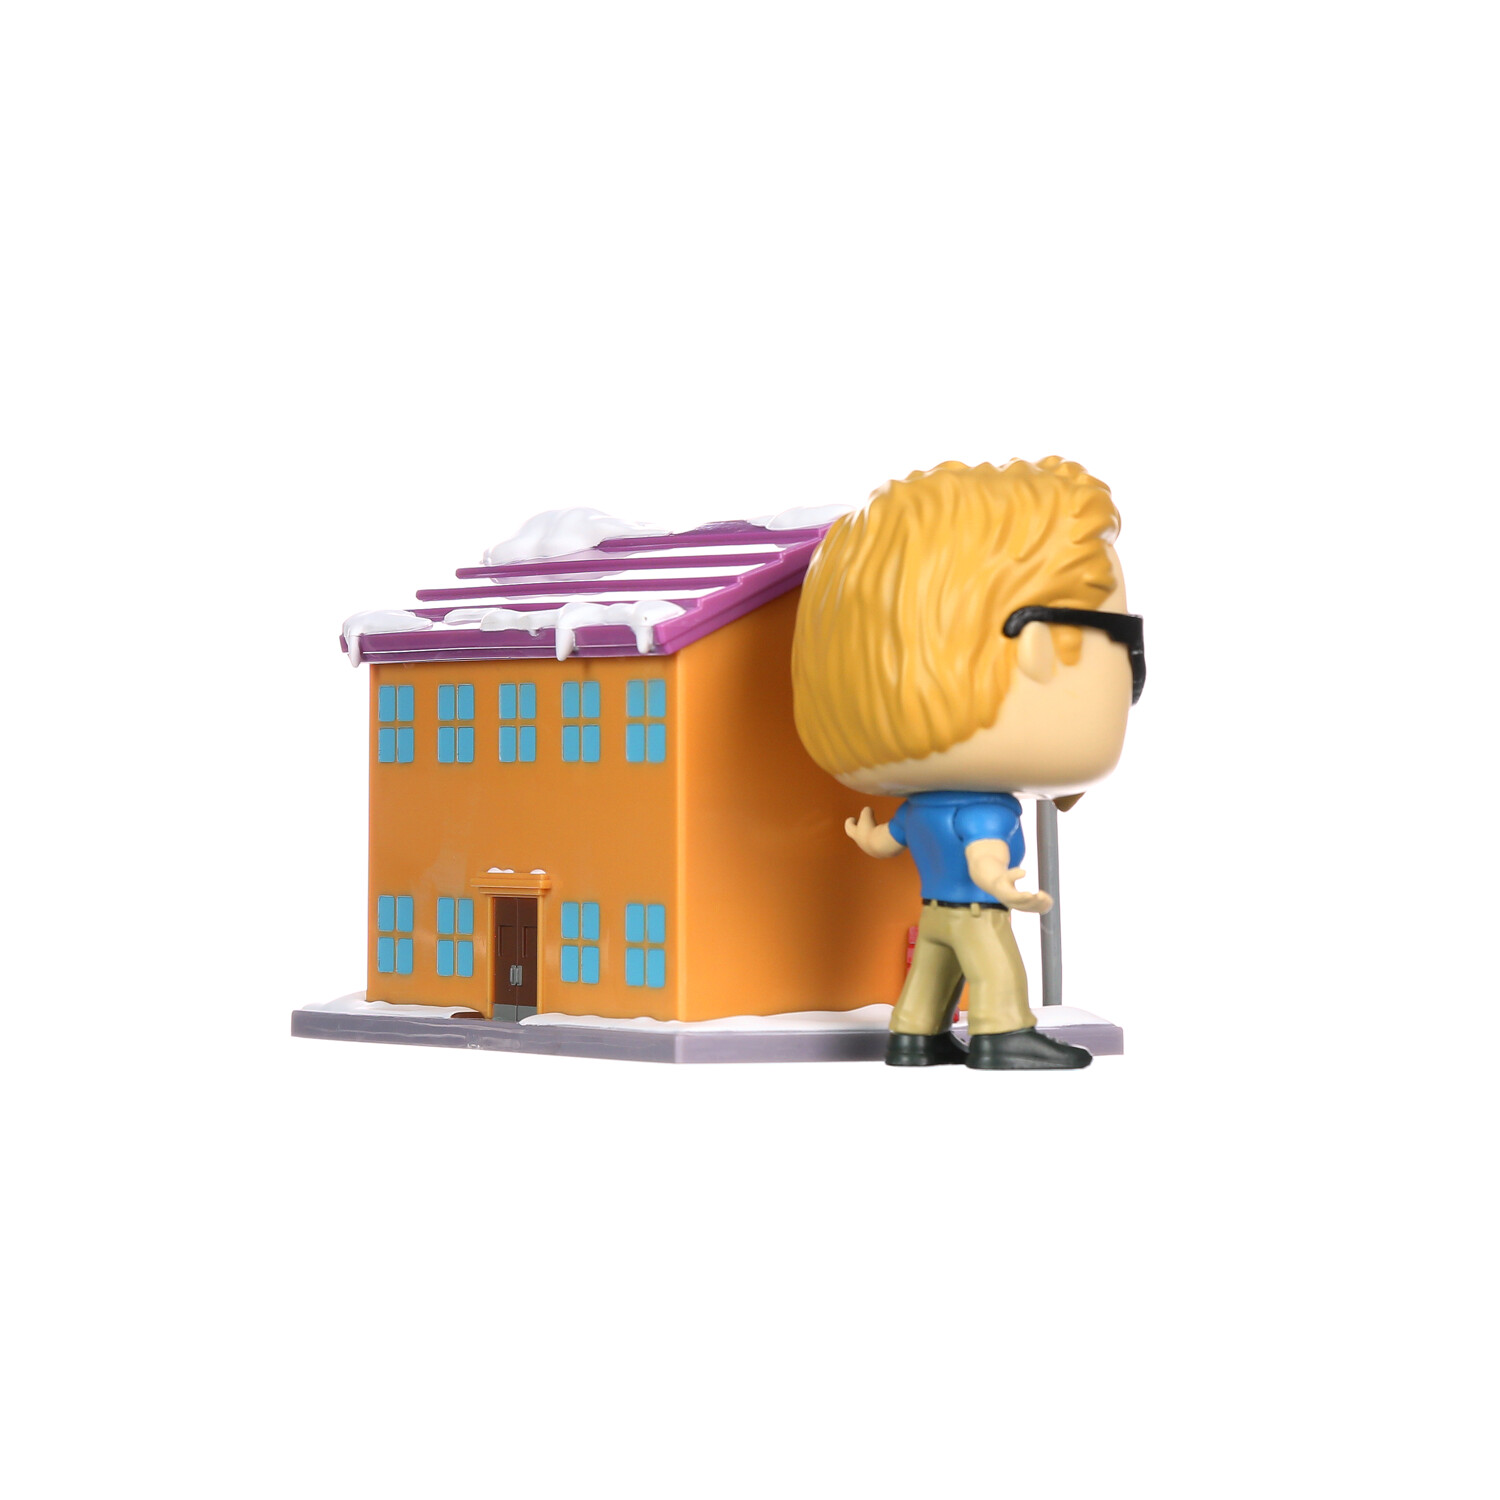 Funko POP TOWN: South Park - Elementary with PC Principal